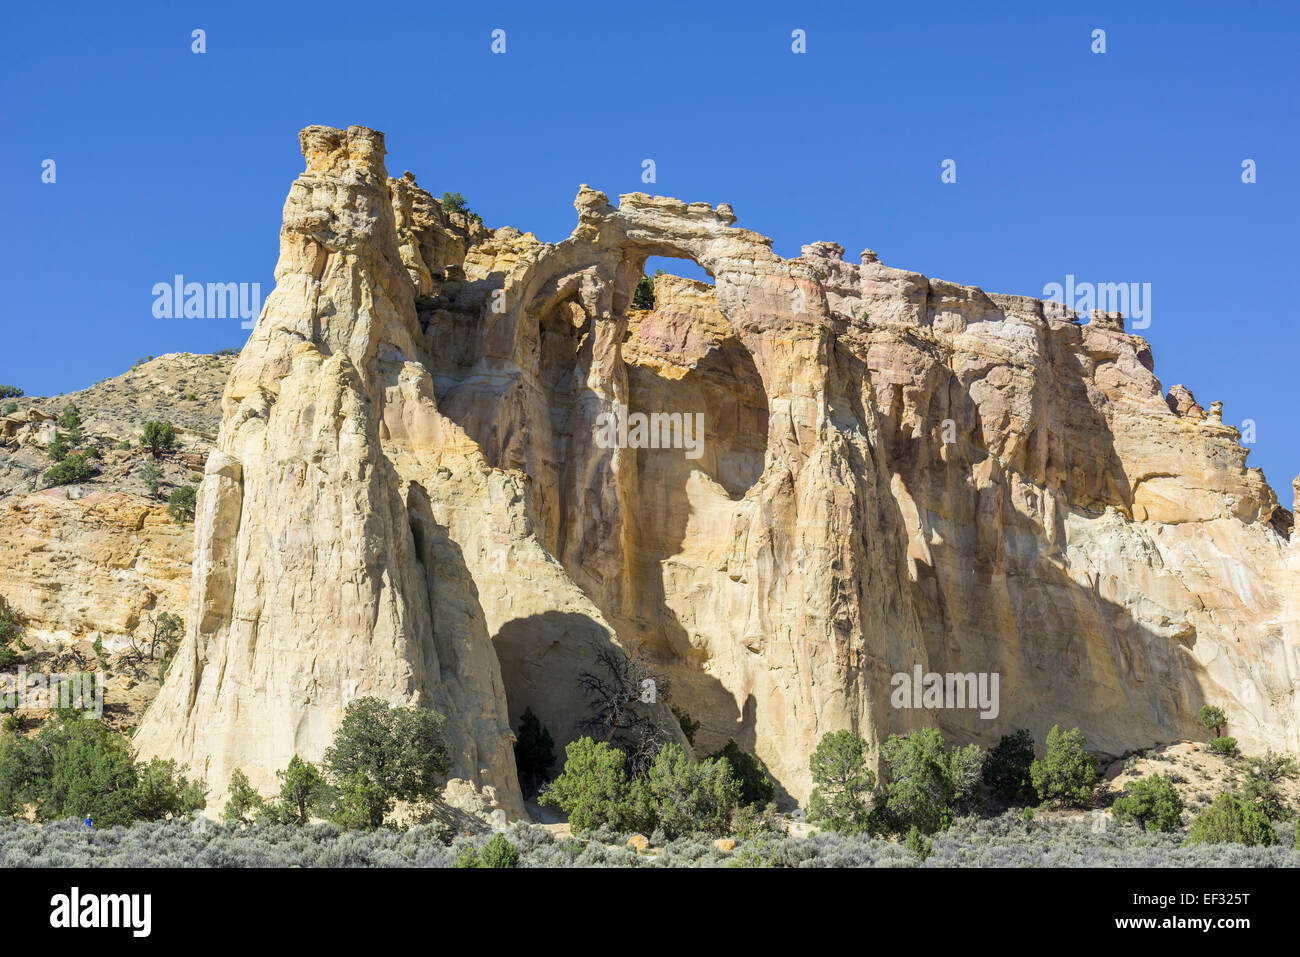 Rock formation, cottonwood canyon road, Utah, united states Banque D'Images